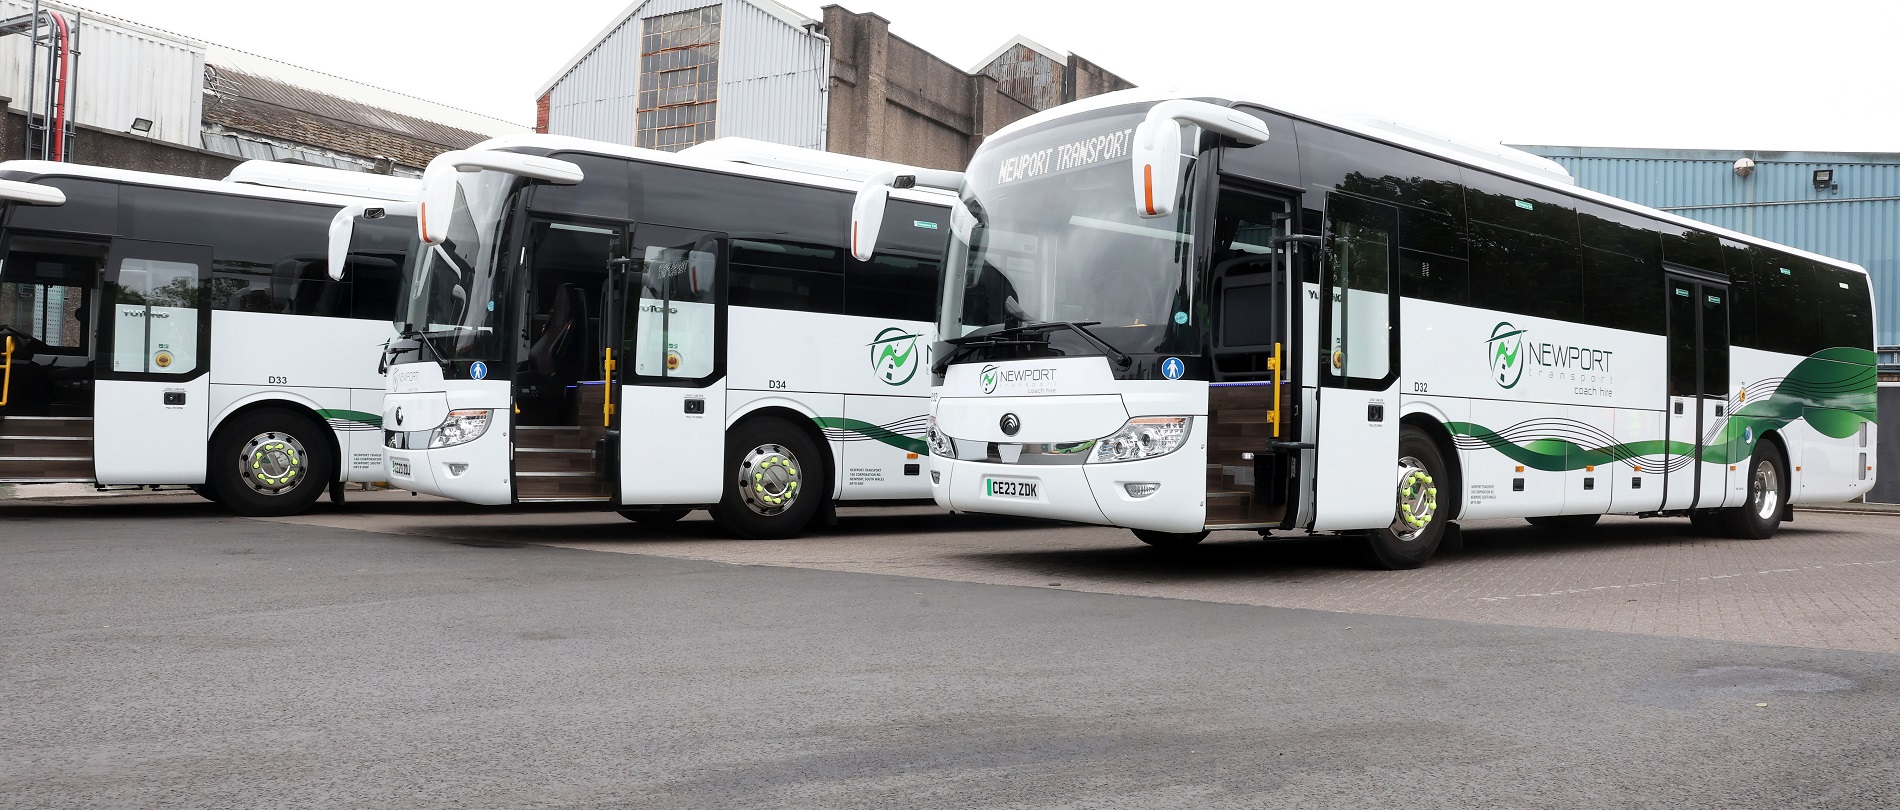 Newport Transport takes Wales’ first electric coaches